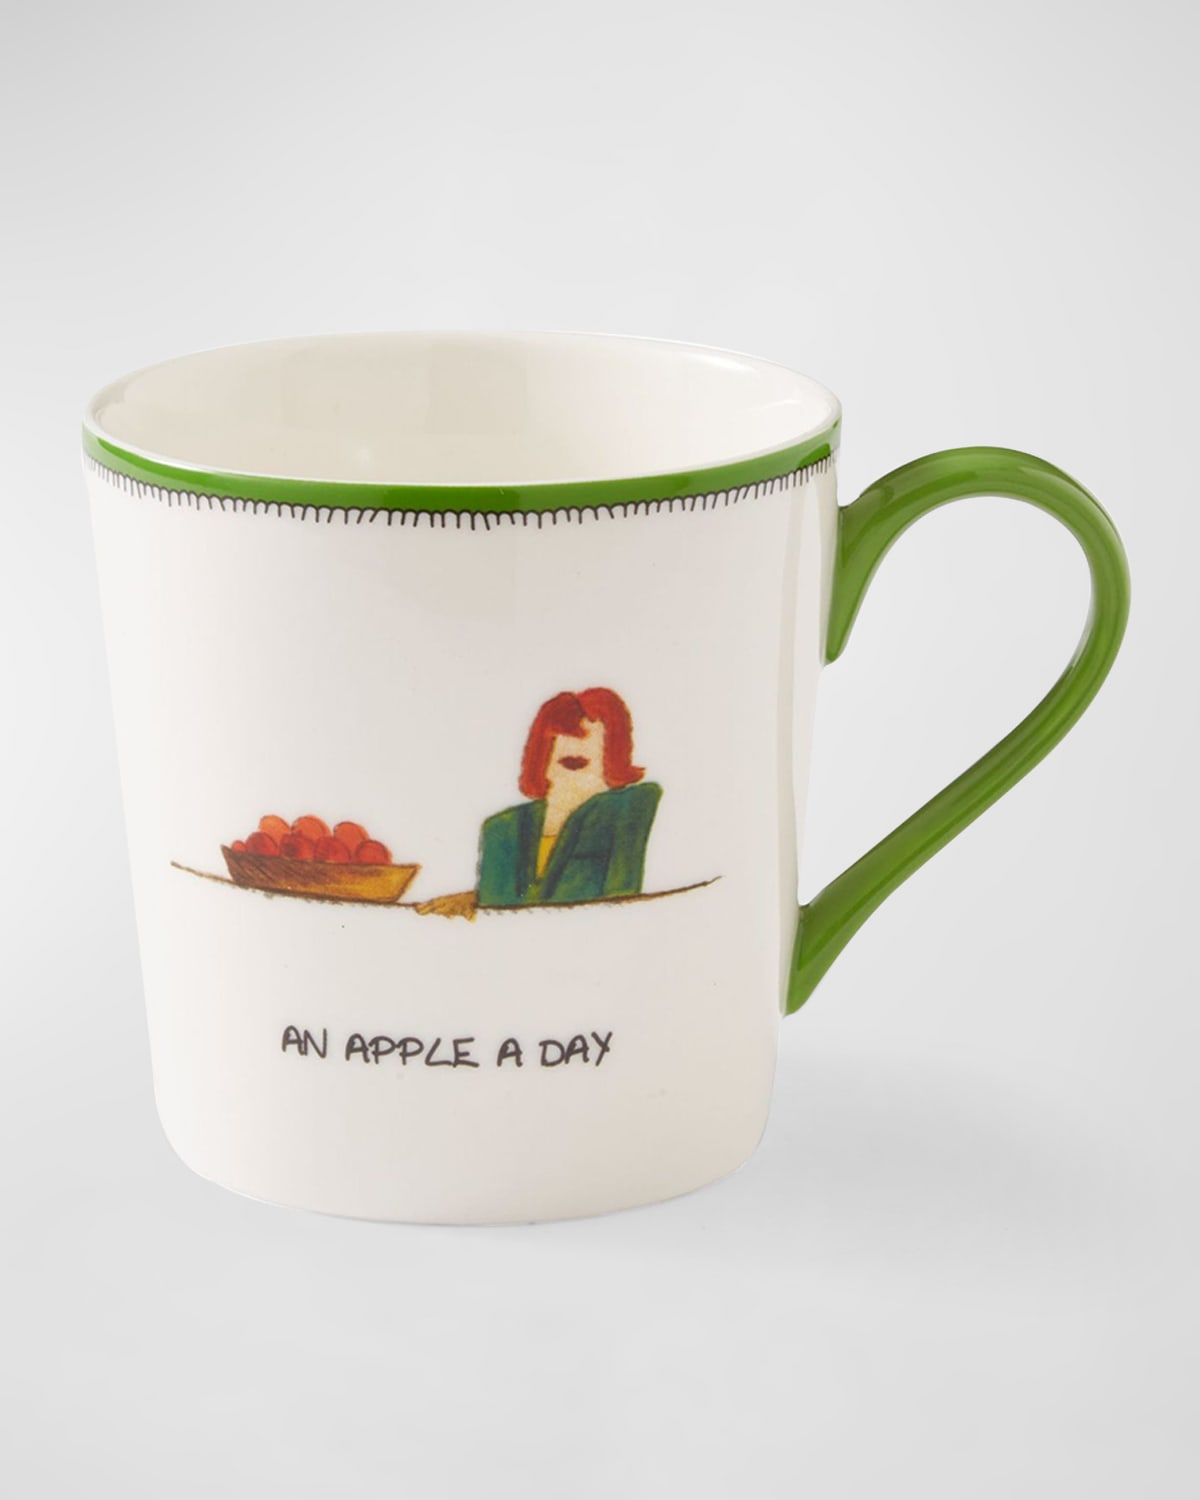 Kit Kemp For Spode Apple A Day Doodle Mug In Assorted Colors